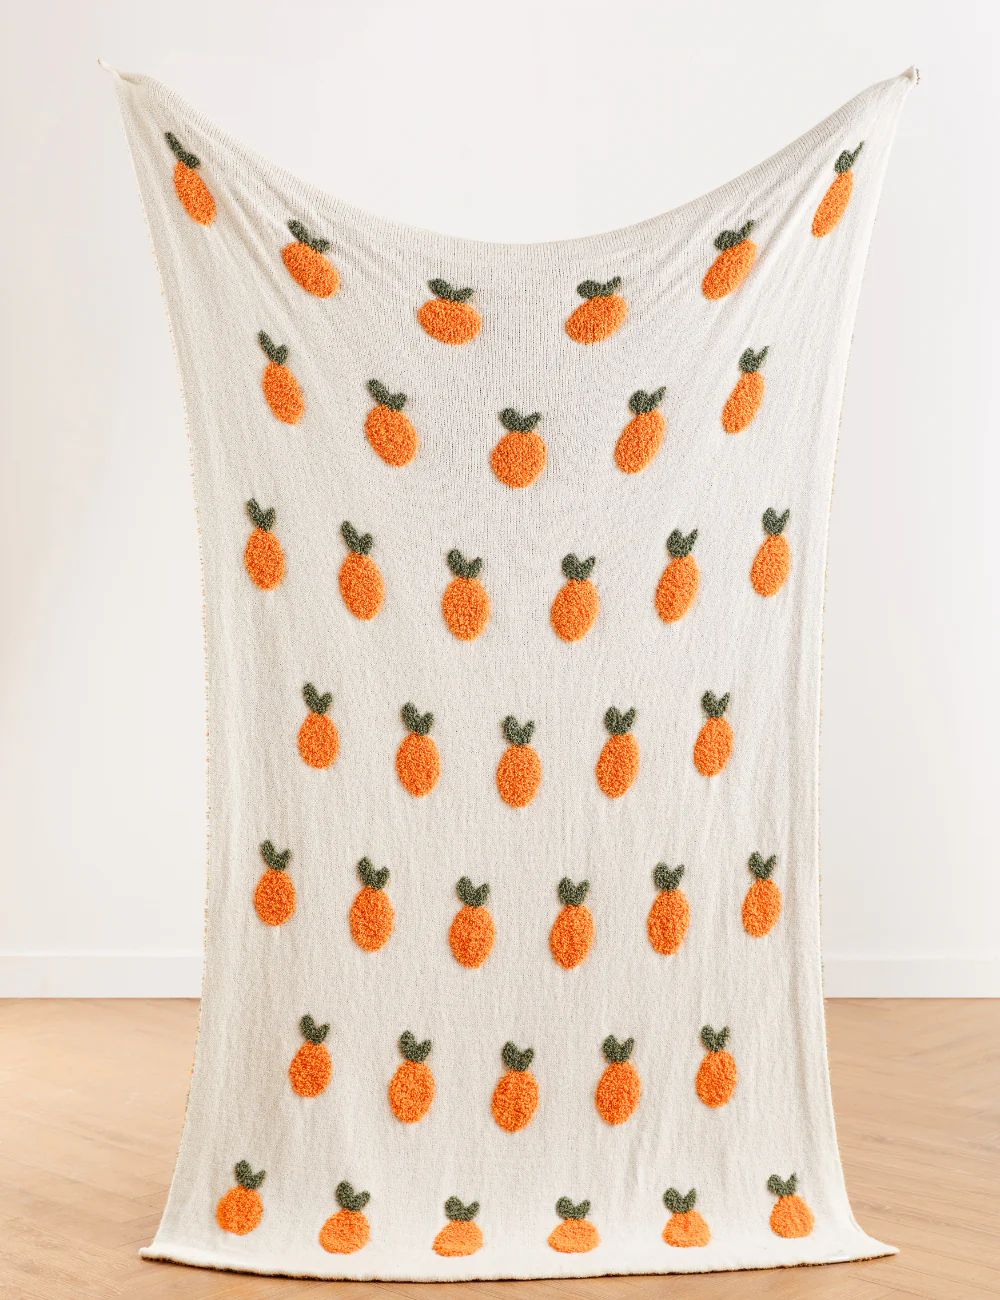 Oranges Buttery Blanket- Full Size | The Styled Collection